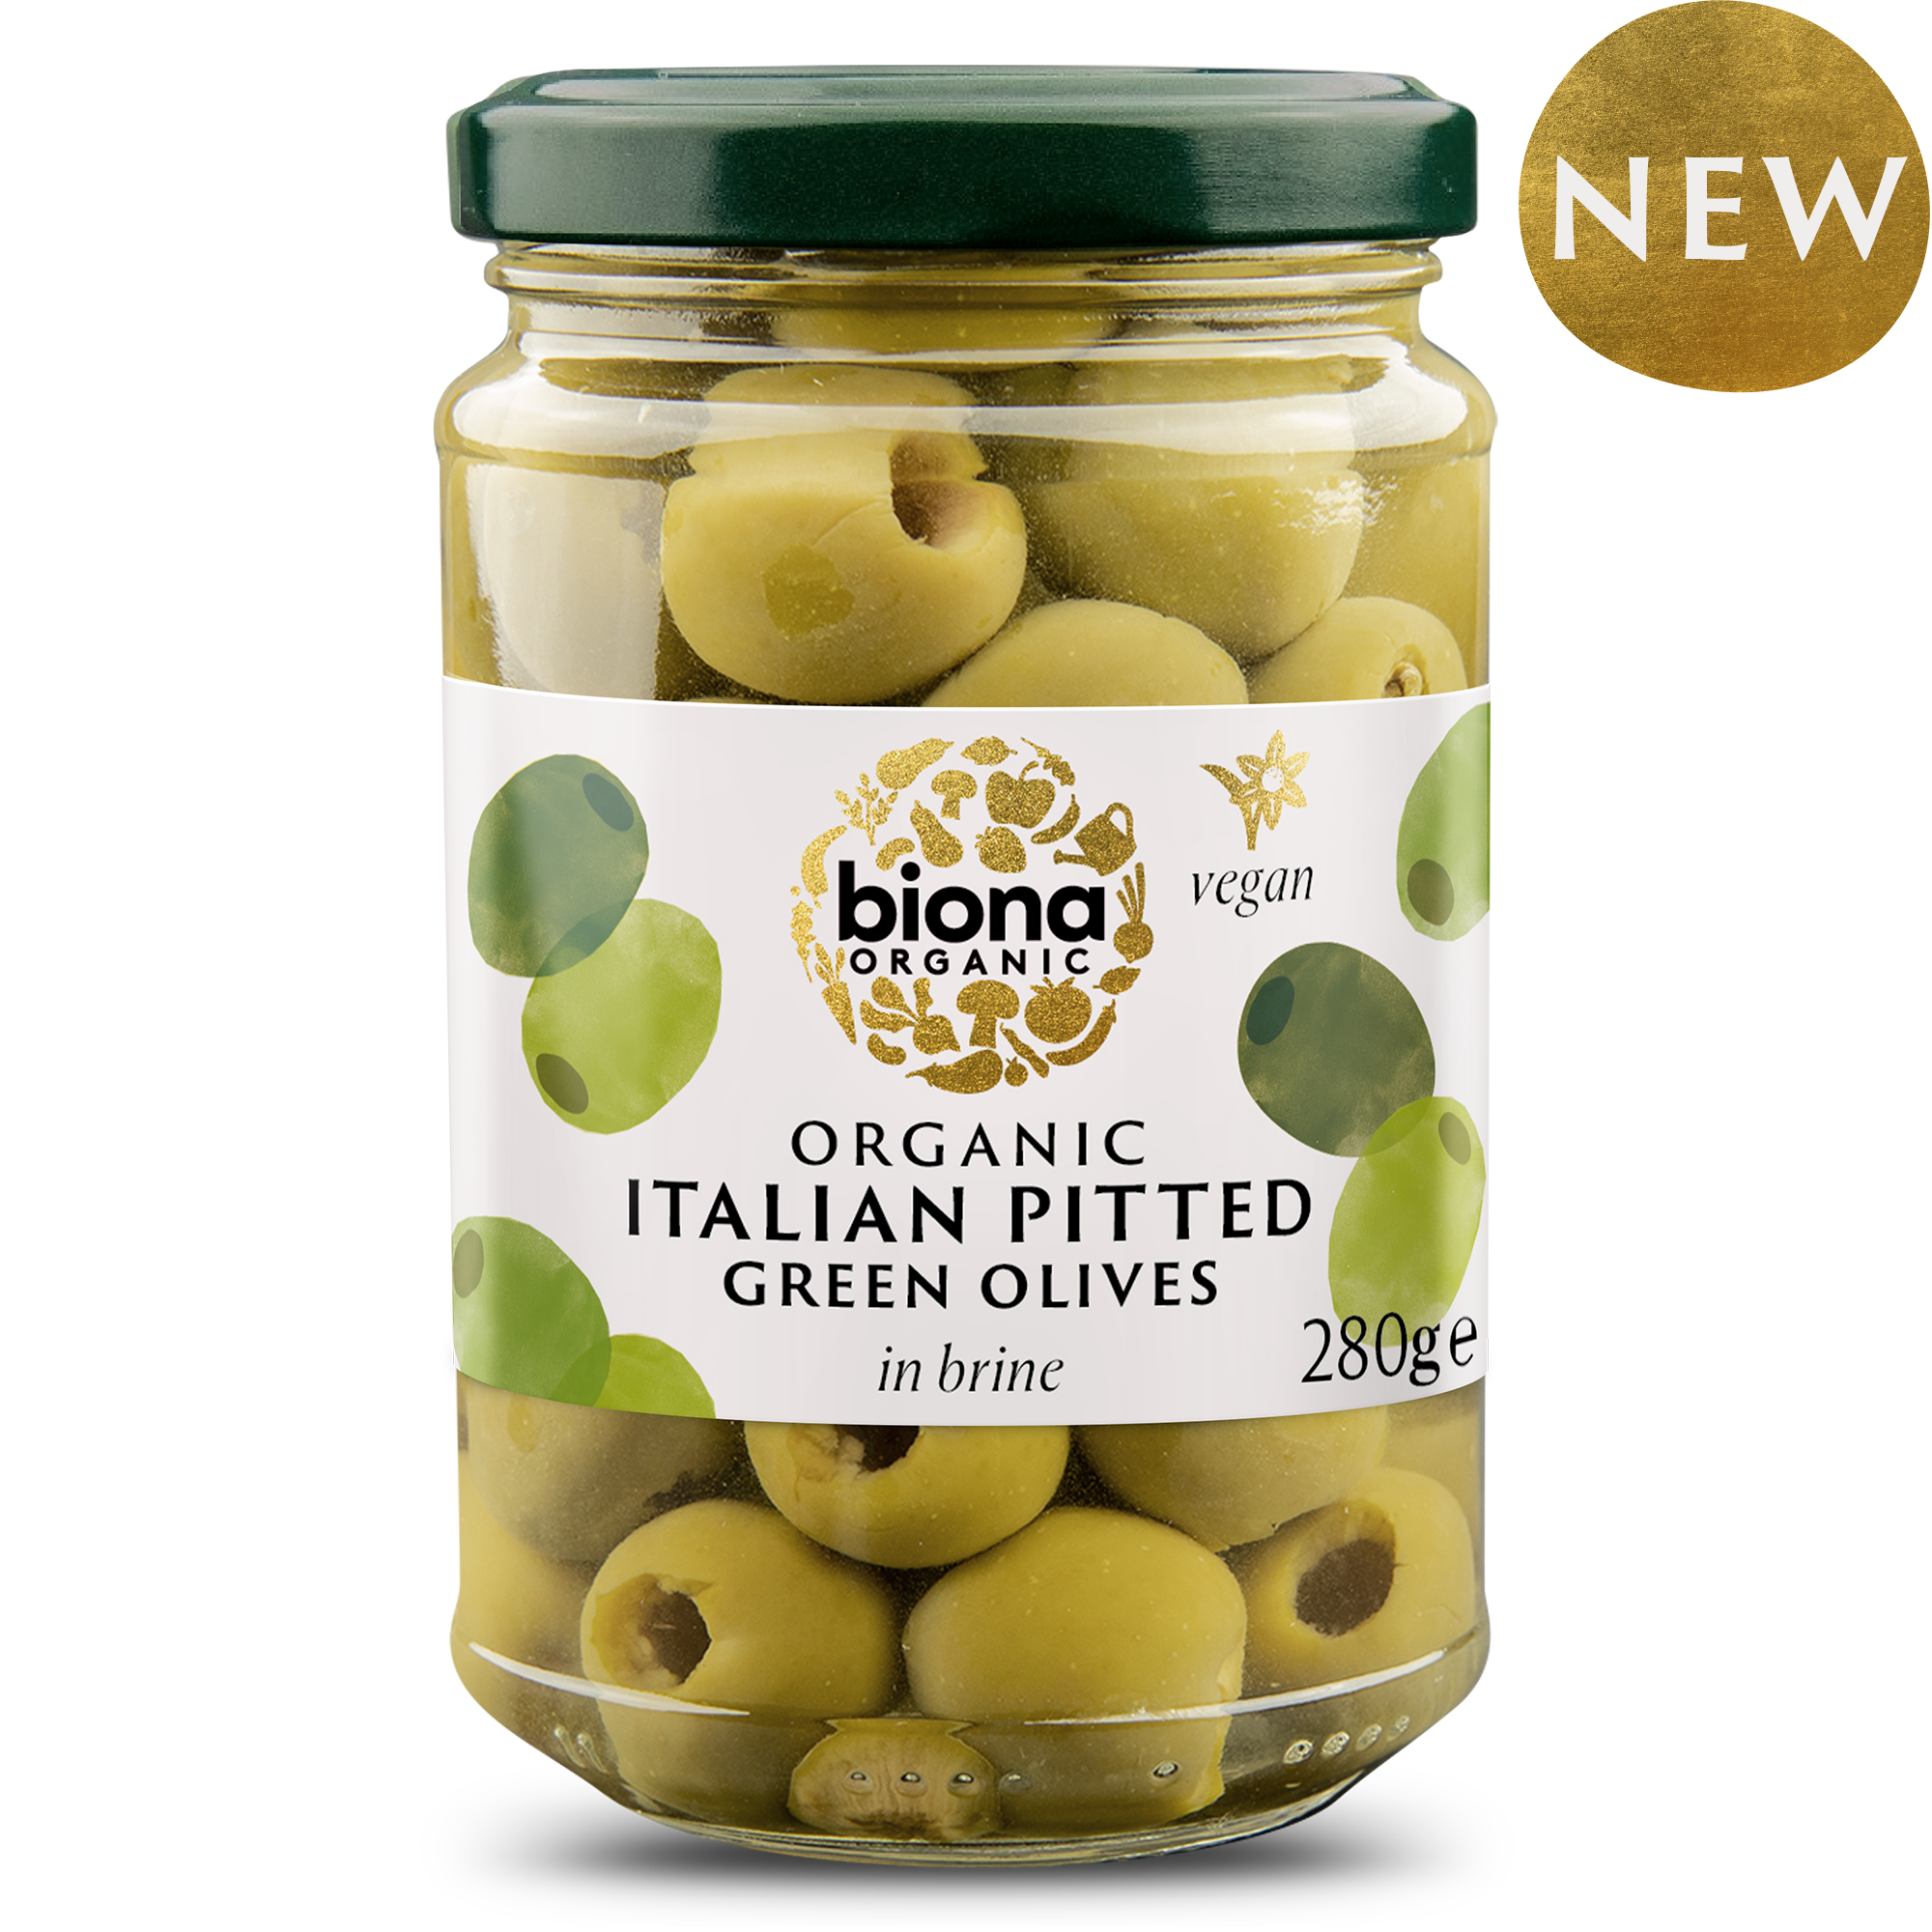 PITTED GREEN OLIVES IN BRINE